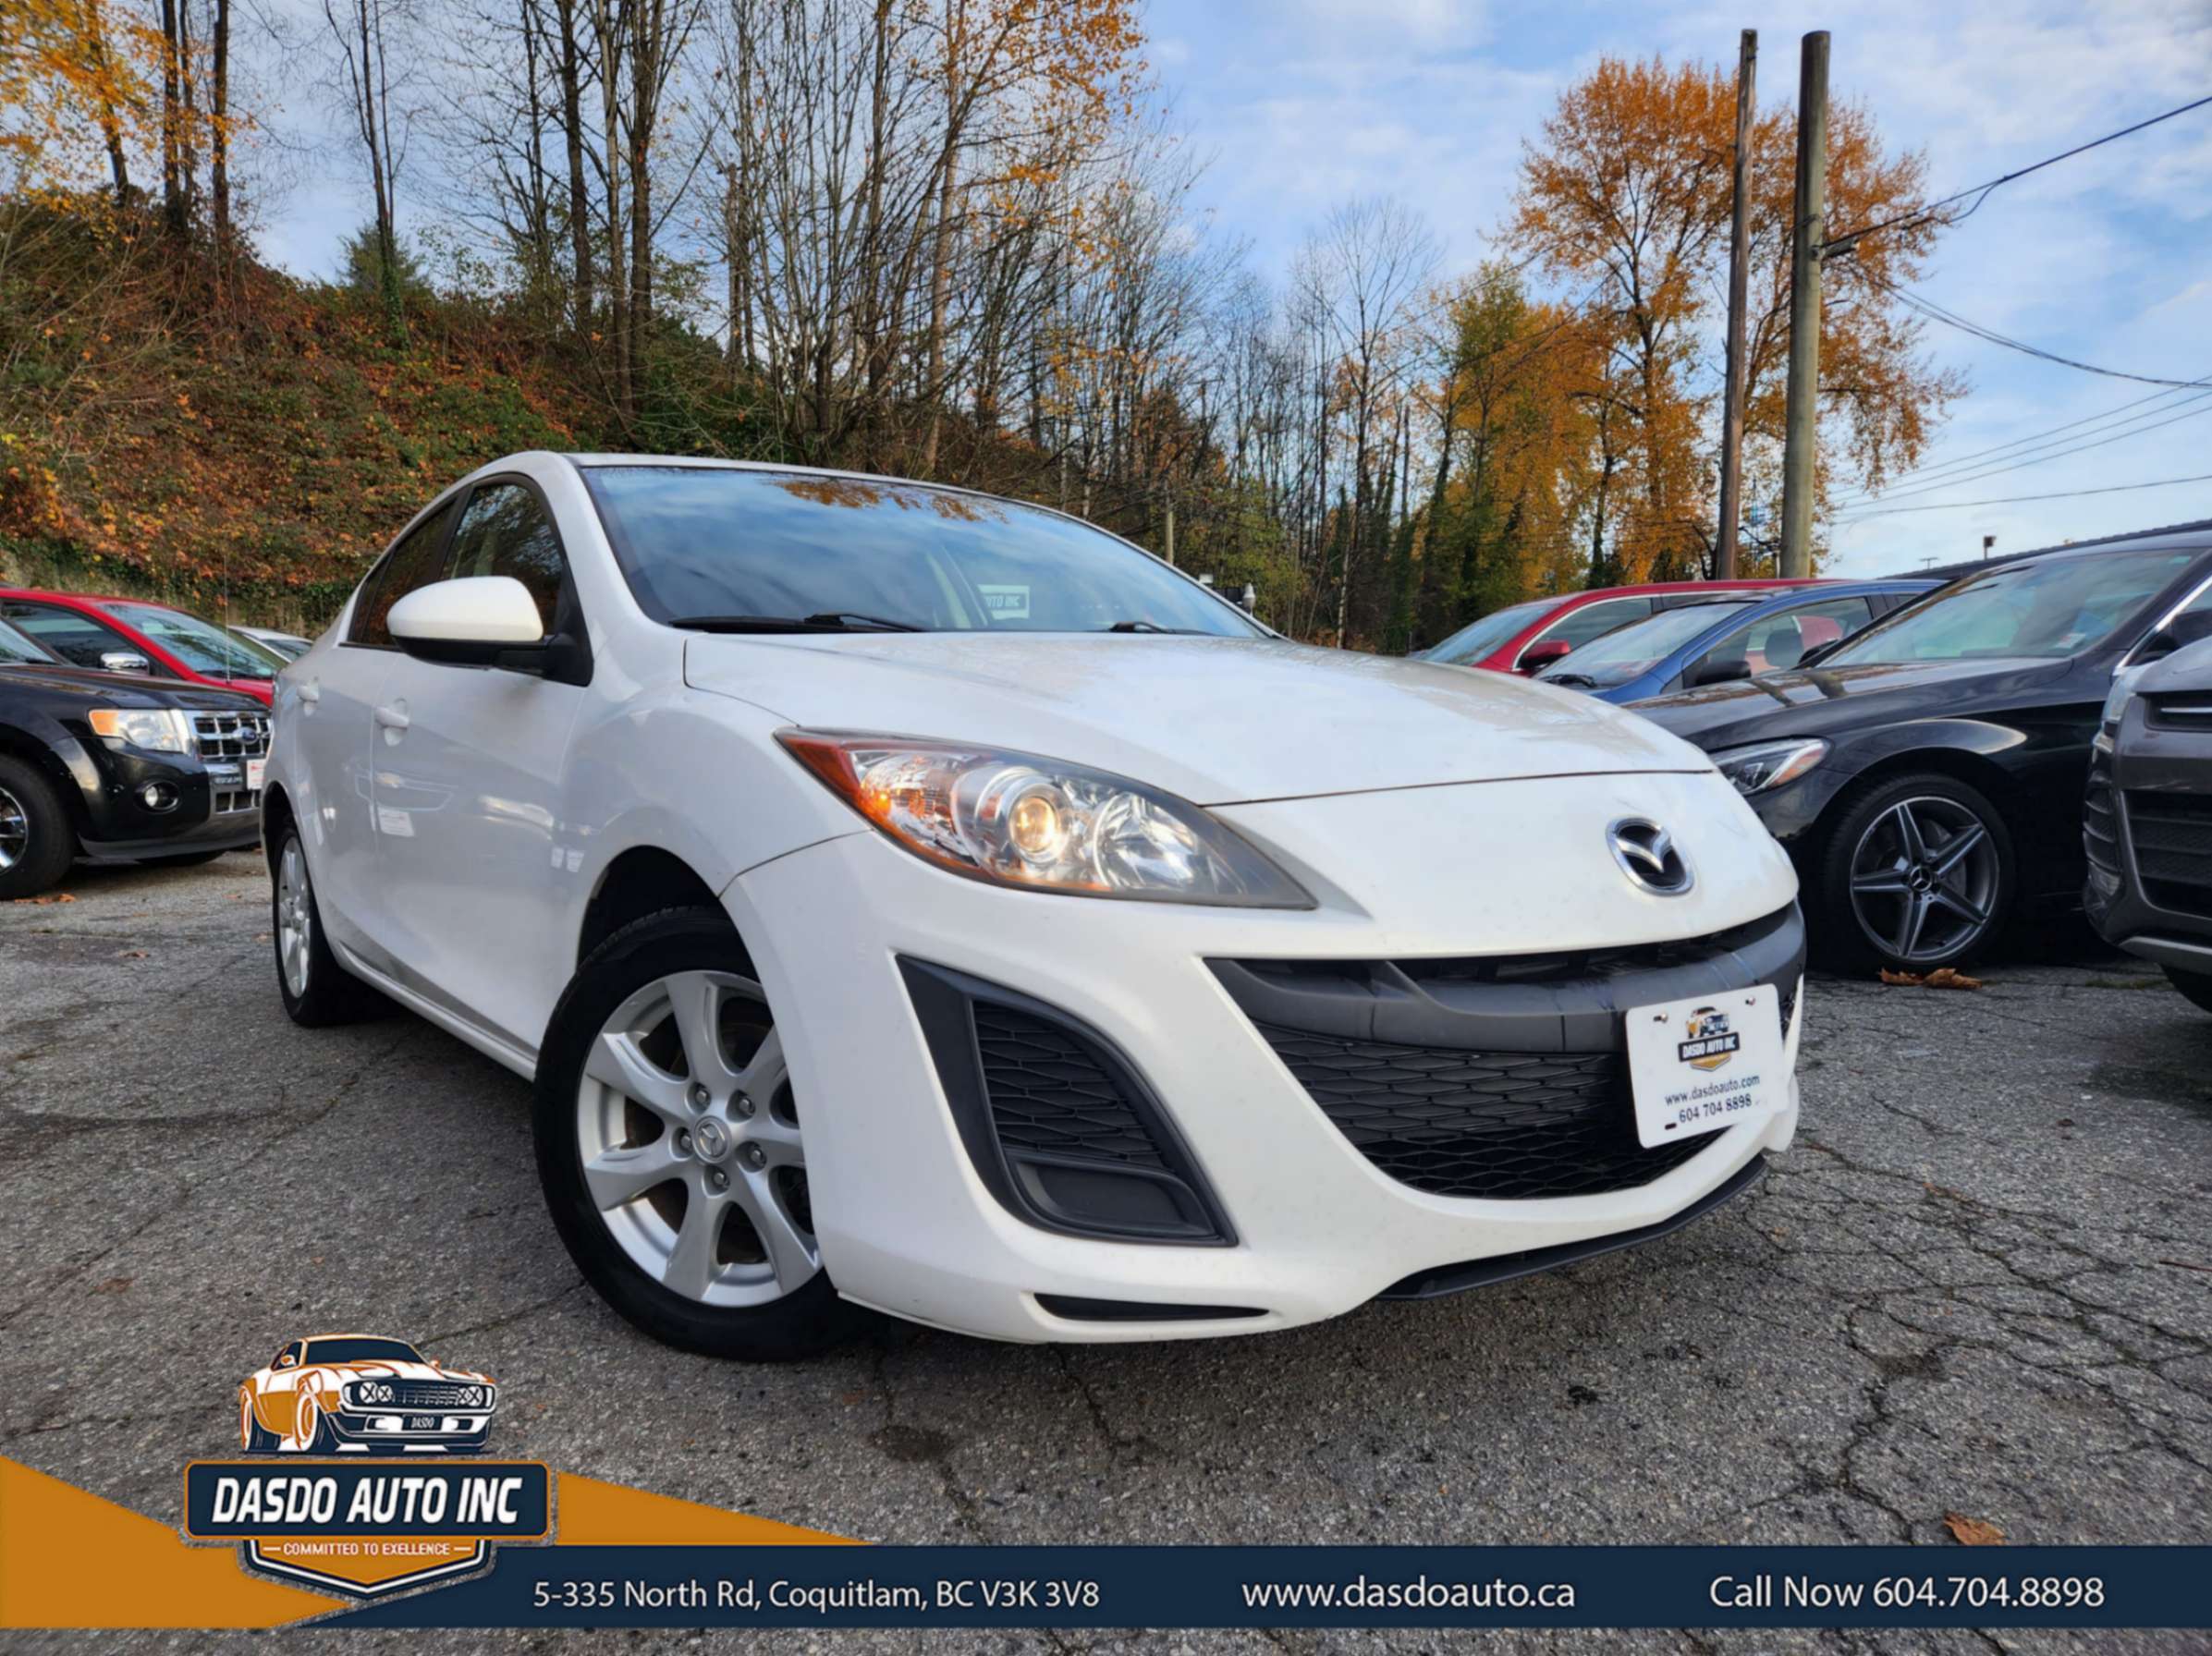 2011 Mazda Mazda3 4dr Sdn GX ***All Services Are Up To Date***